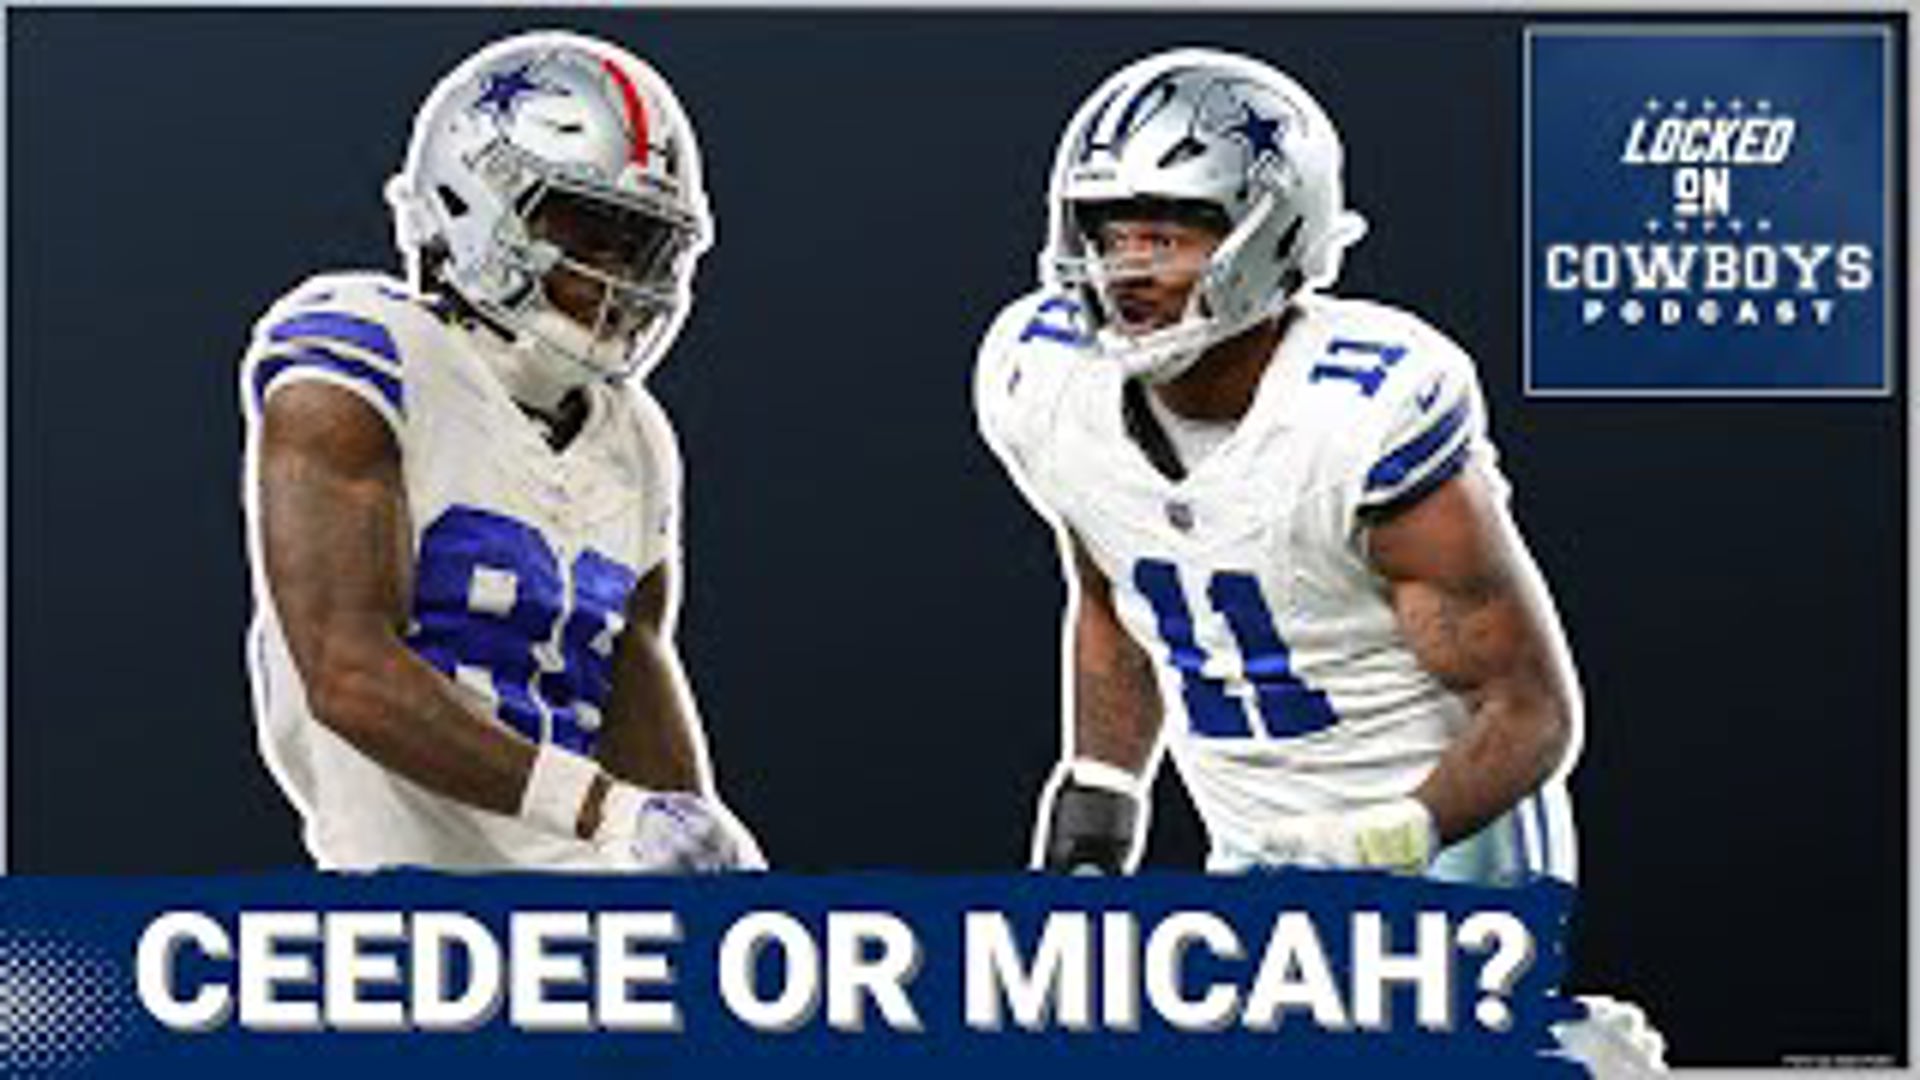 The Dallas Cowboys are expected to pay CeeDee Lamb and Micah Parsons both upwards of $35 million a season. But if the Cowboys can only pick one player to extend...